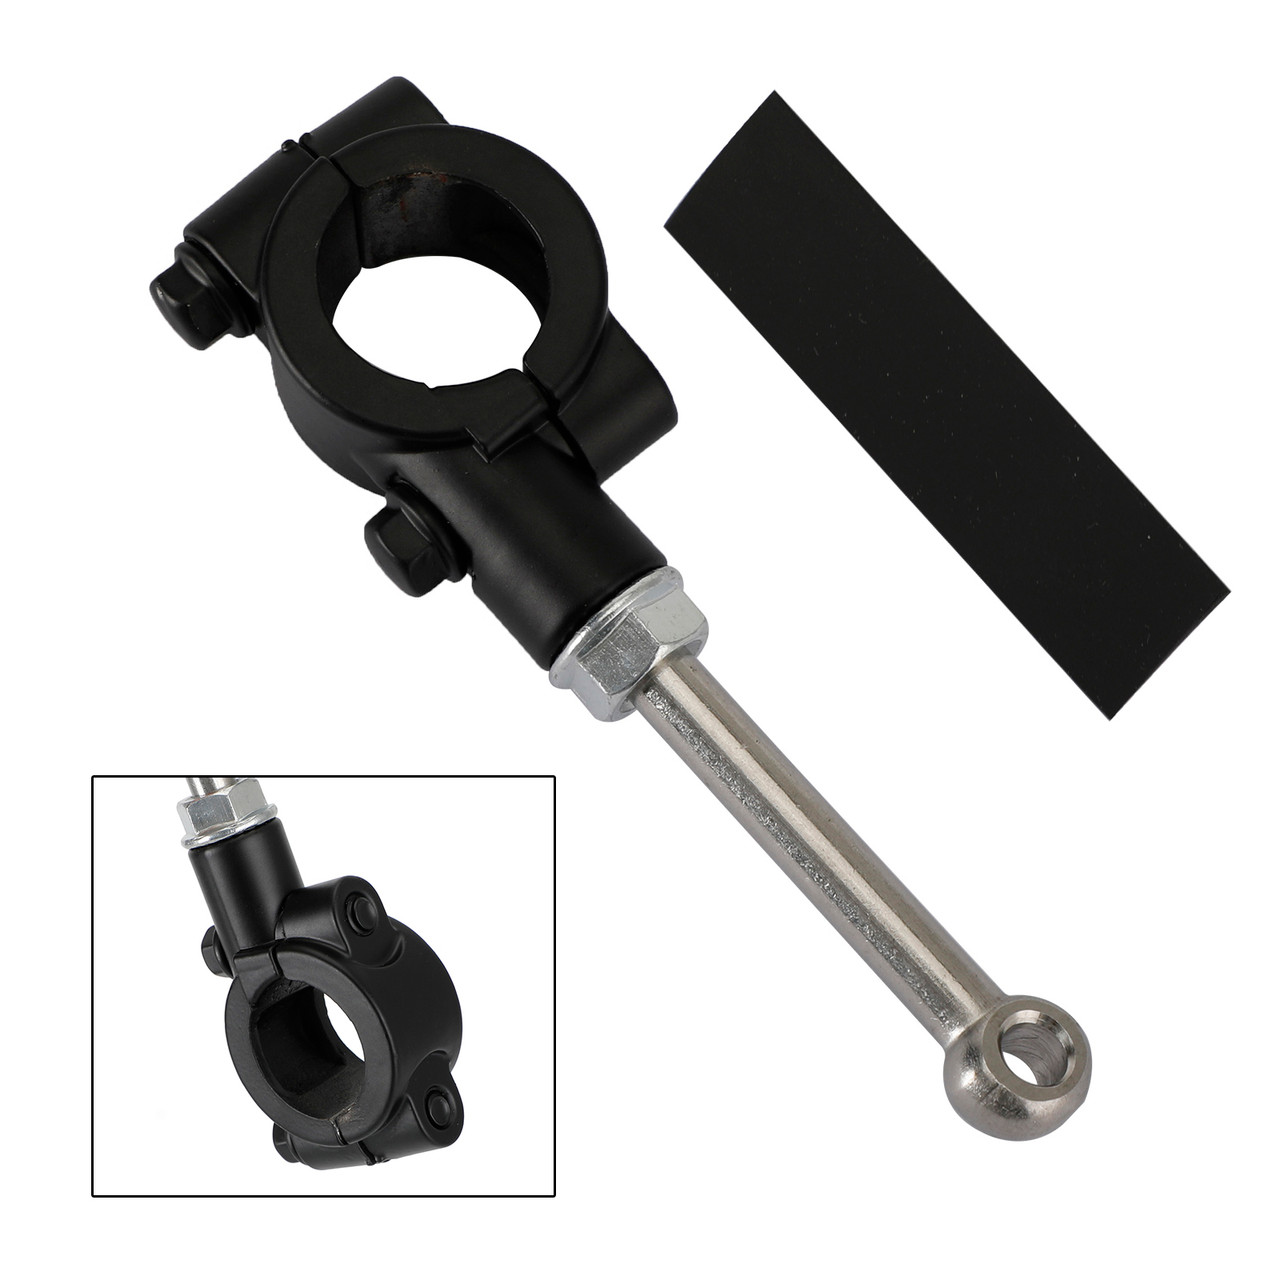 Universal Motorcycle Stand Kickstand Extension Kit 20-23MM Scooter Support Tool BLK